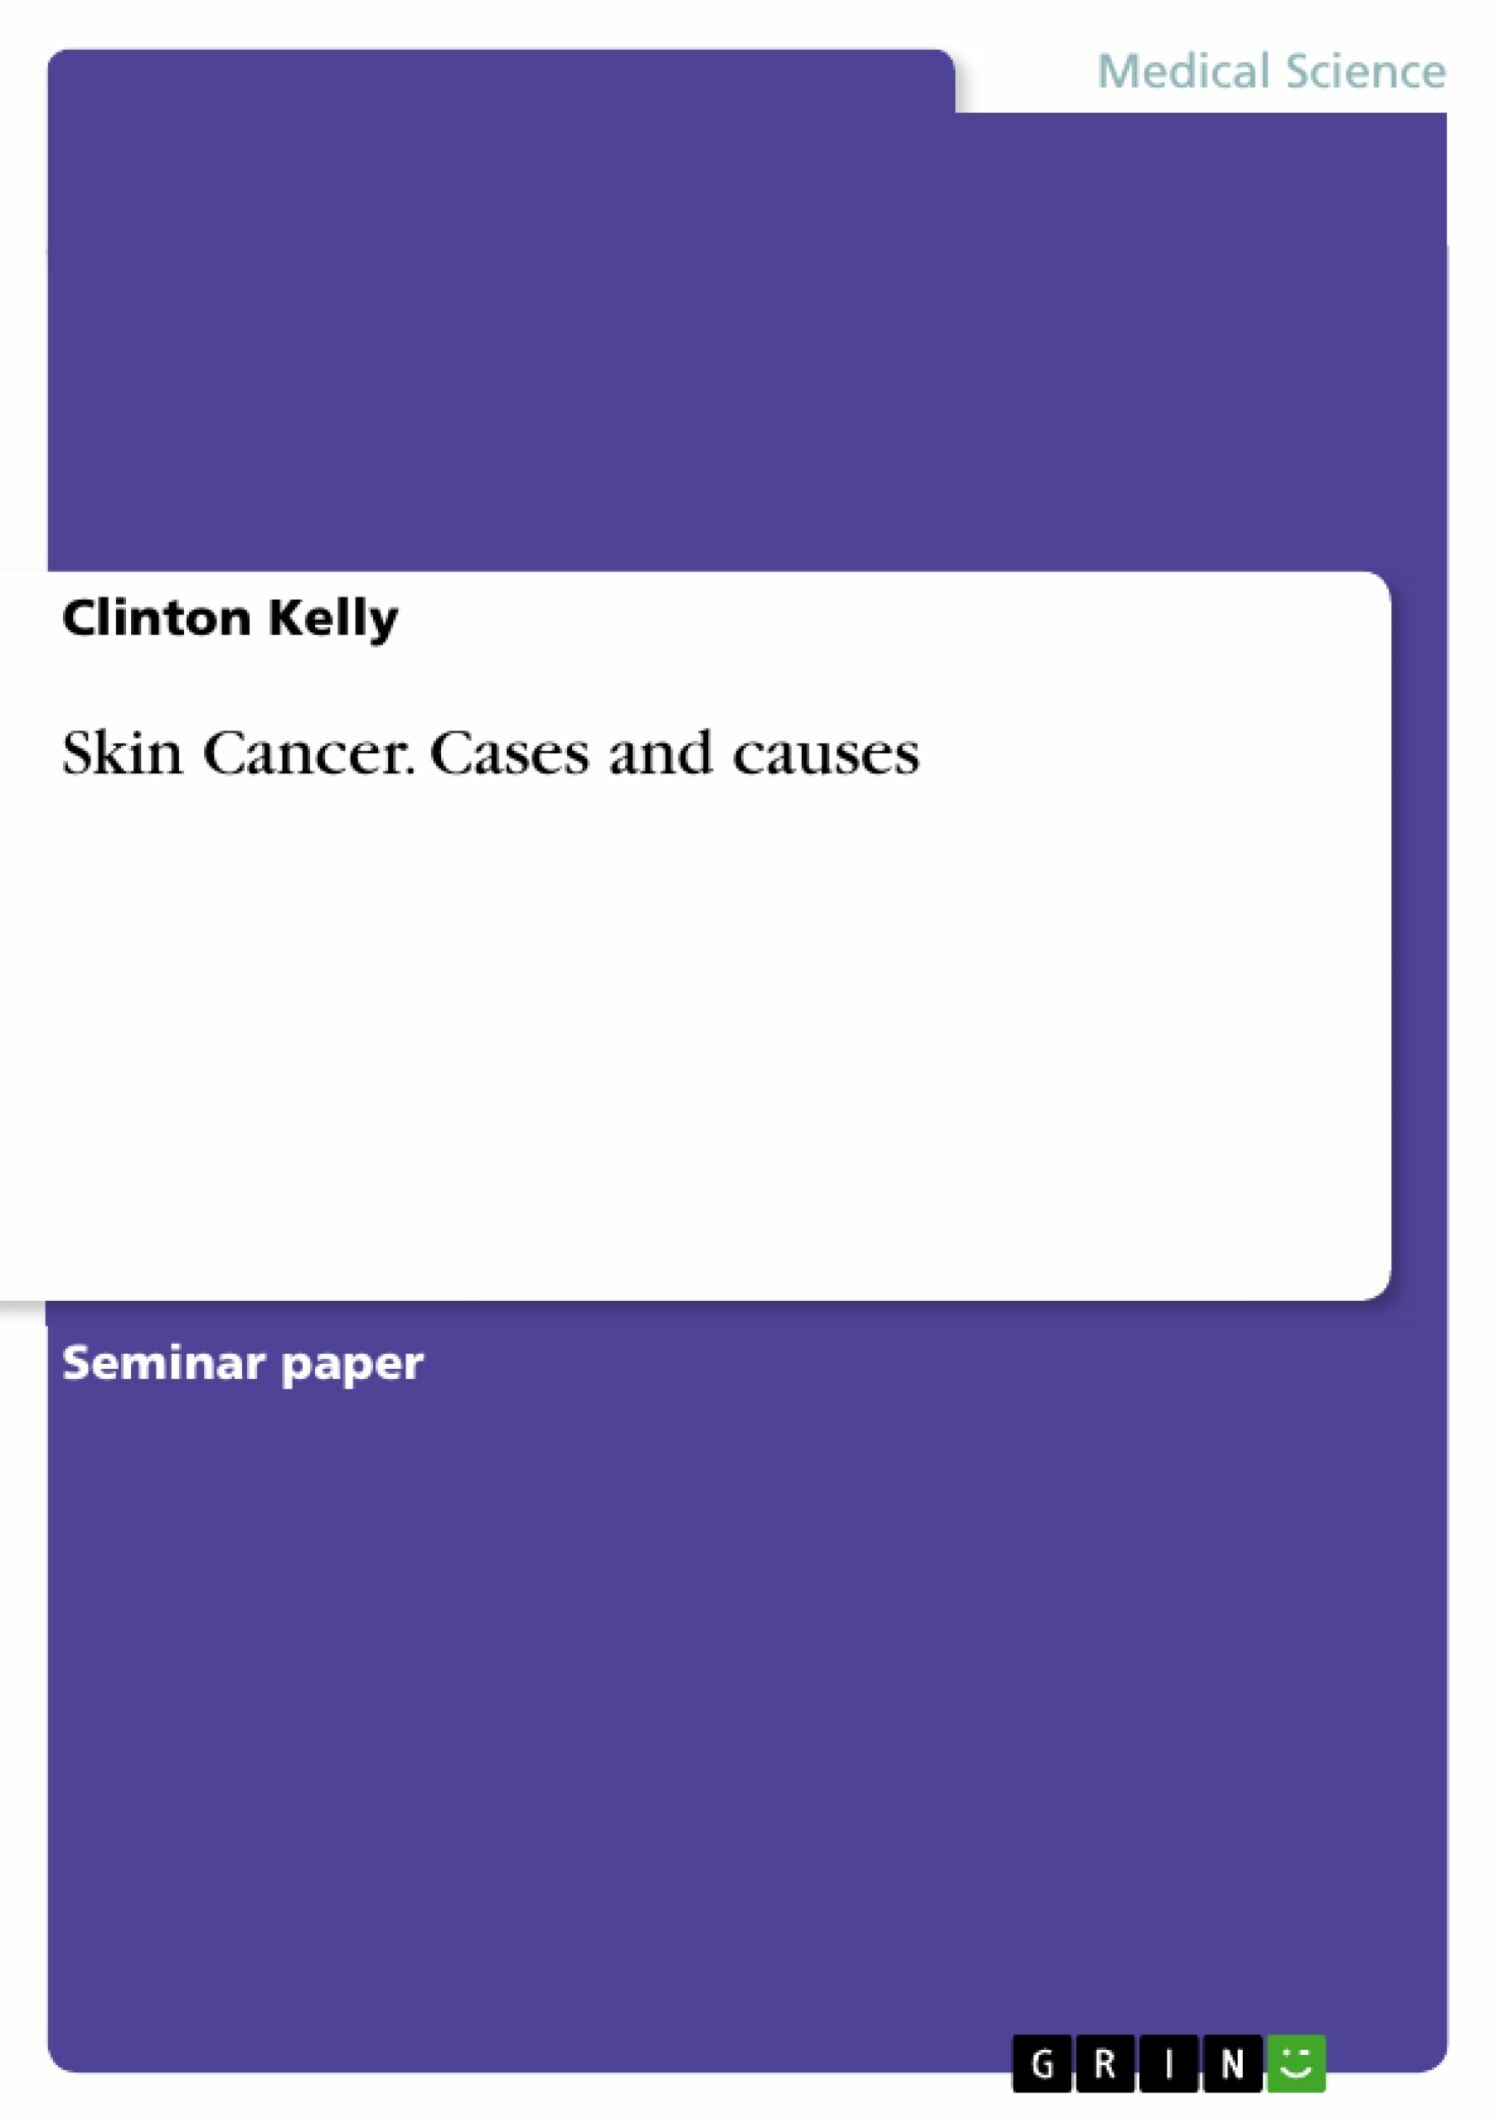 Skin Cancer. Cases and causes